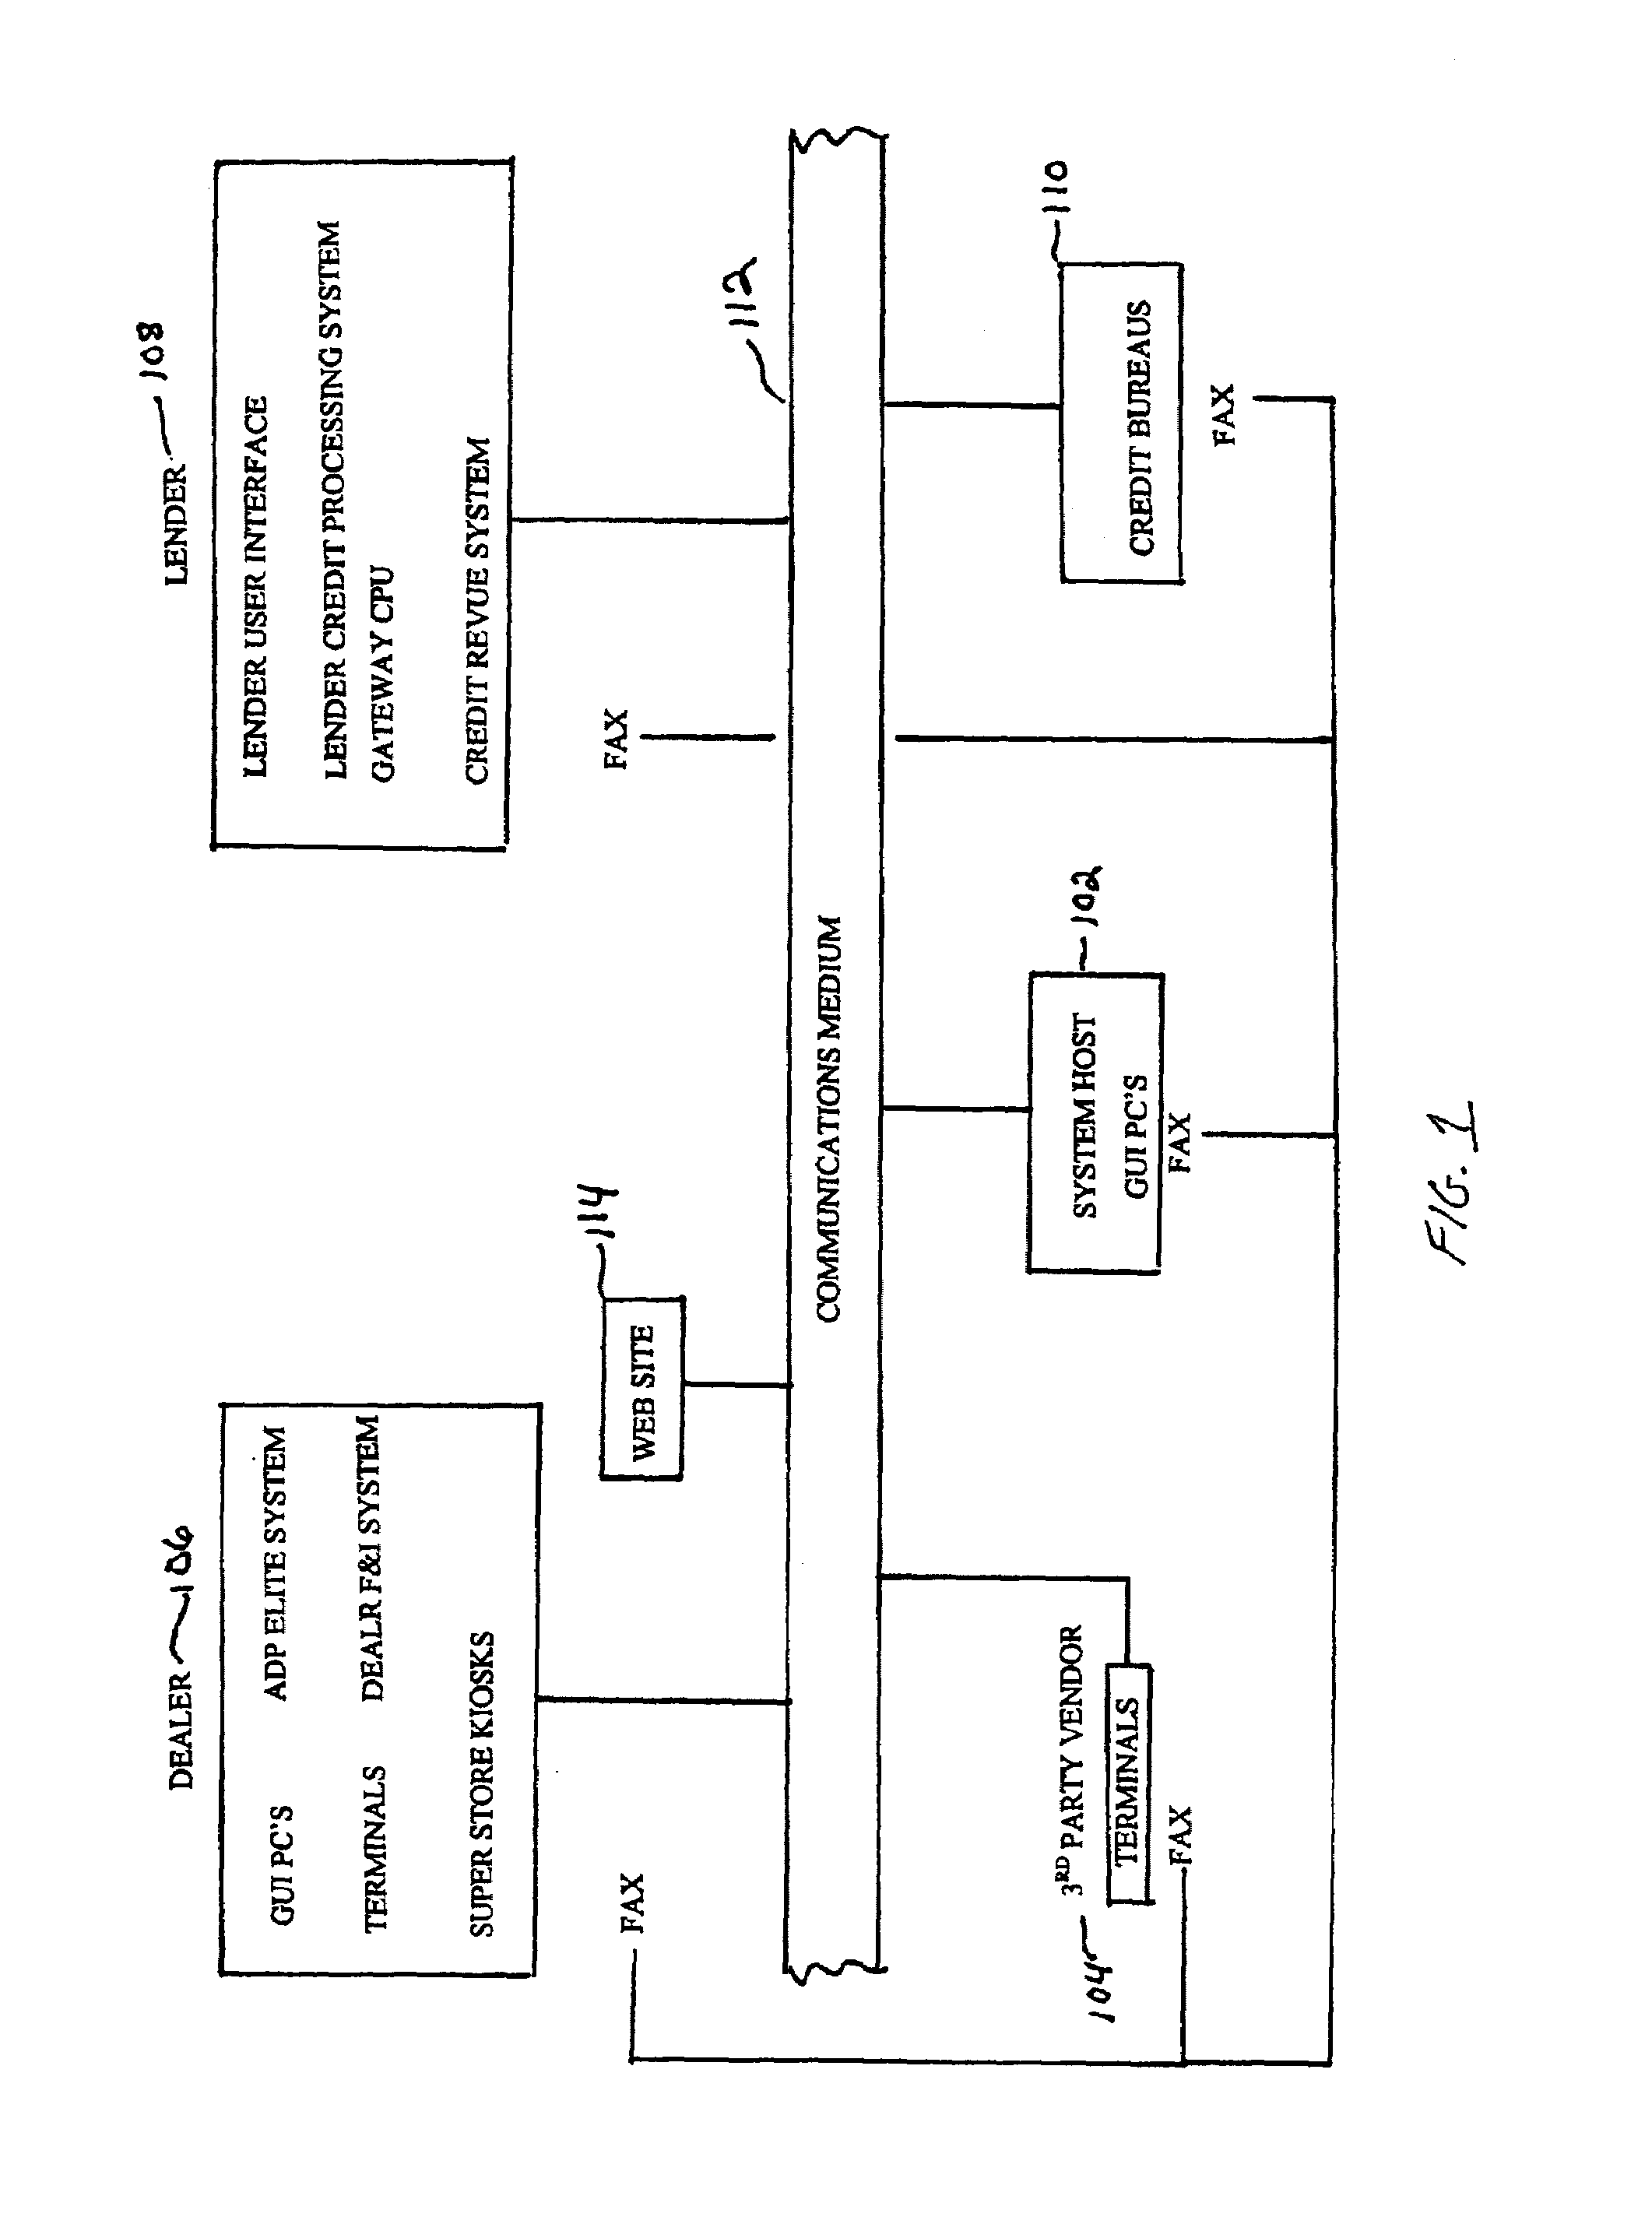 Automated credit application system